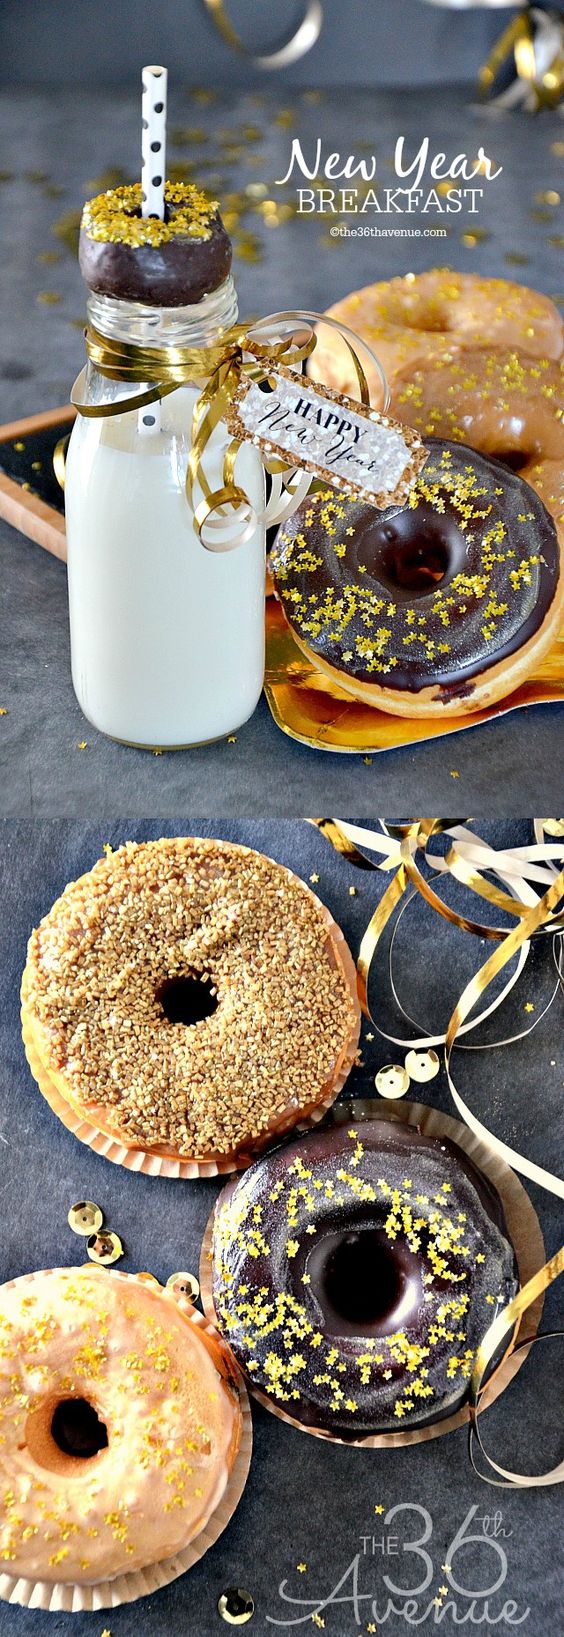 New Year Party and Breakfast Ideas with Donuts